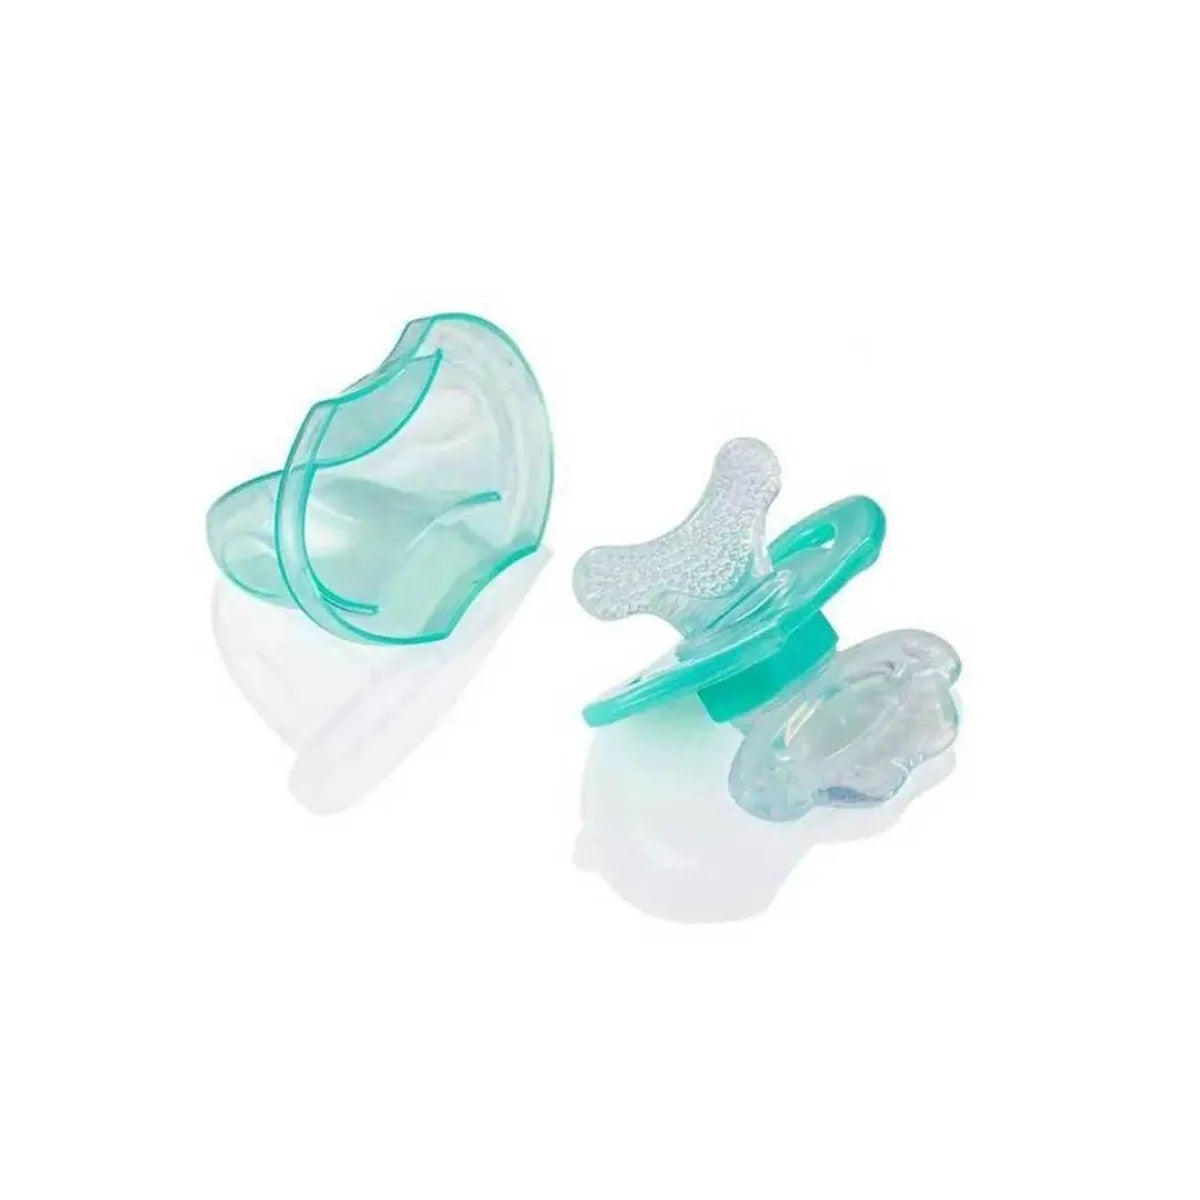 frontease teal teether by brushbaby for teething symptoms